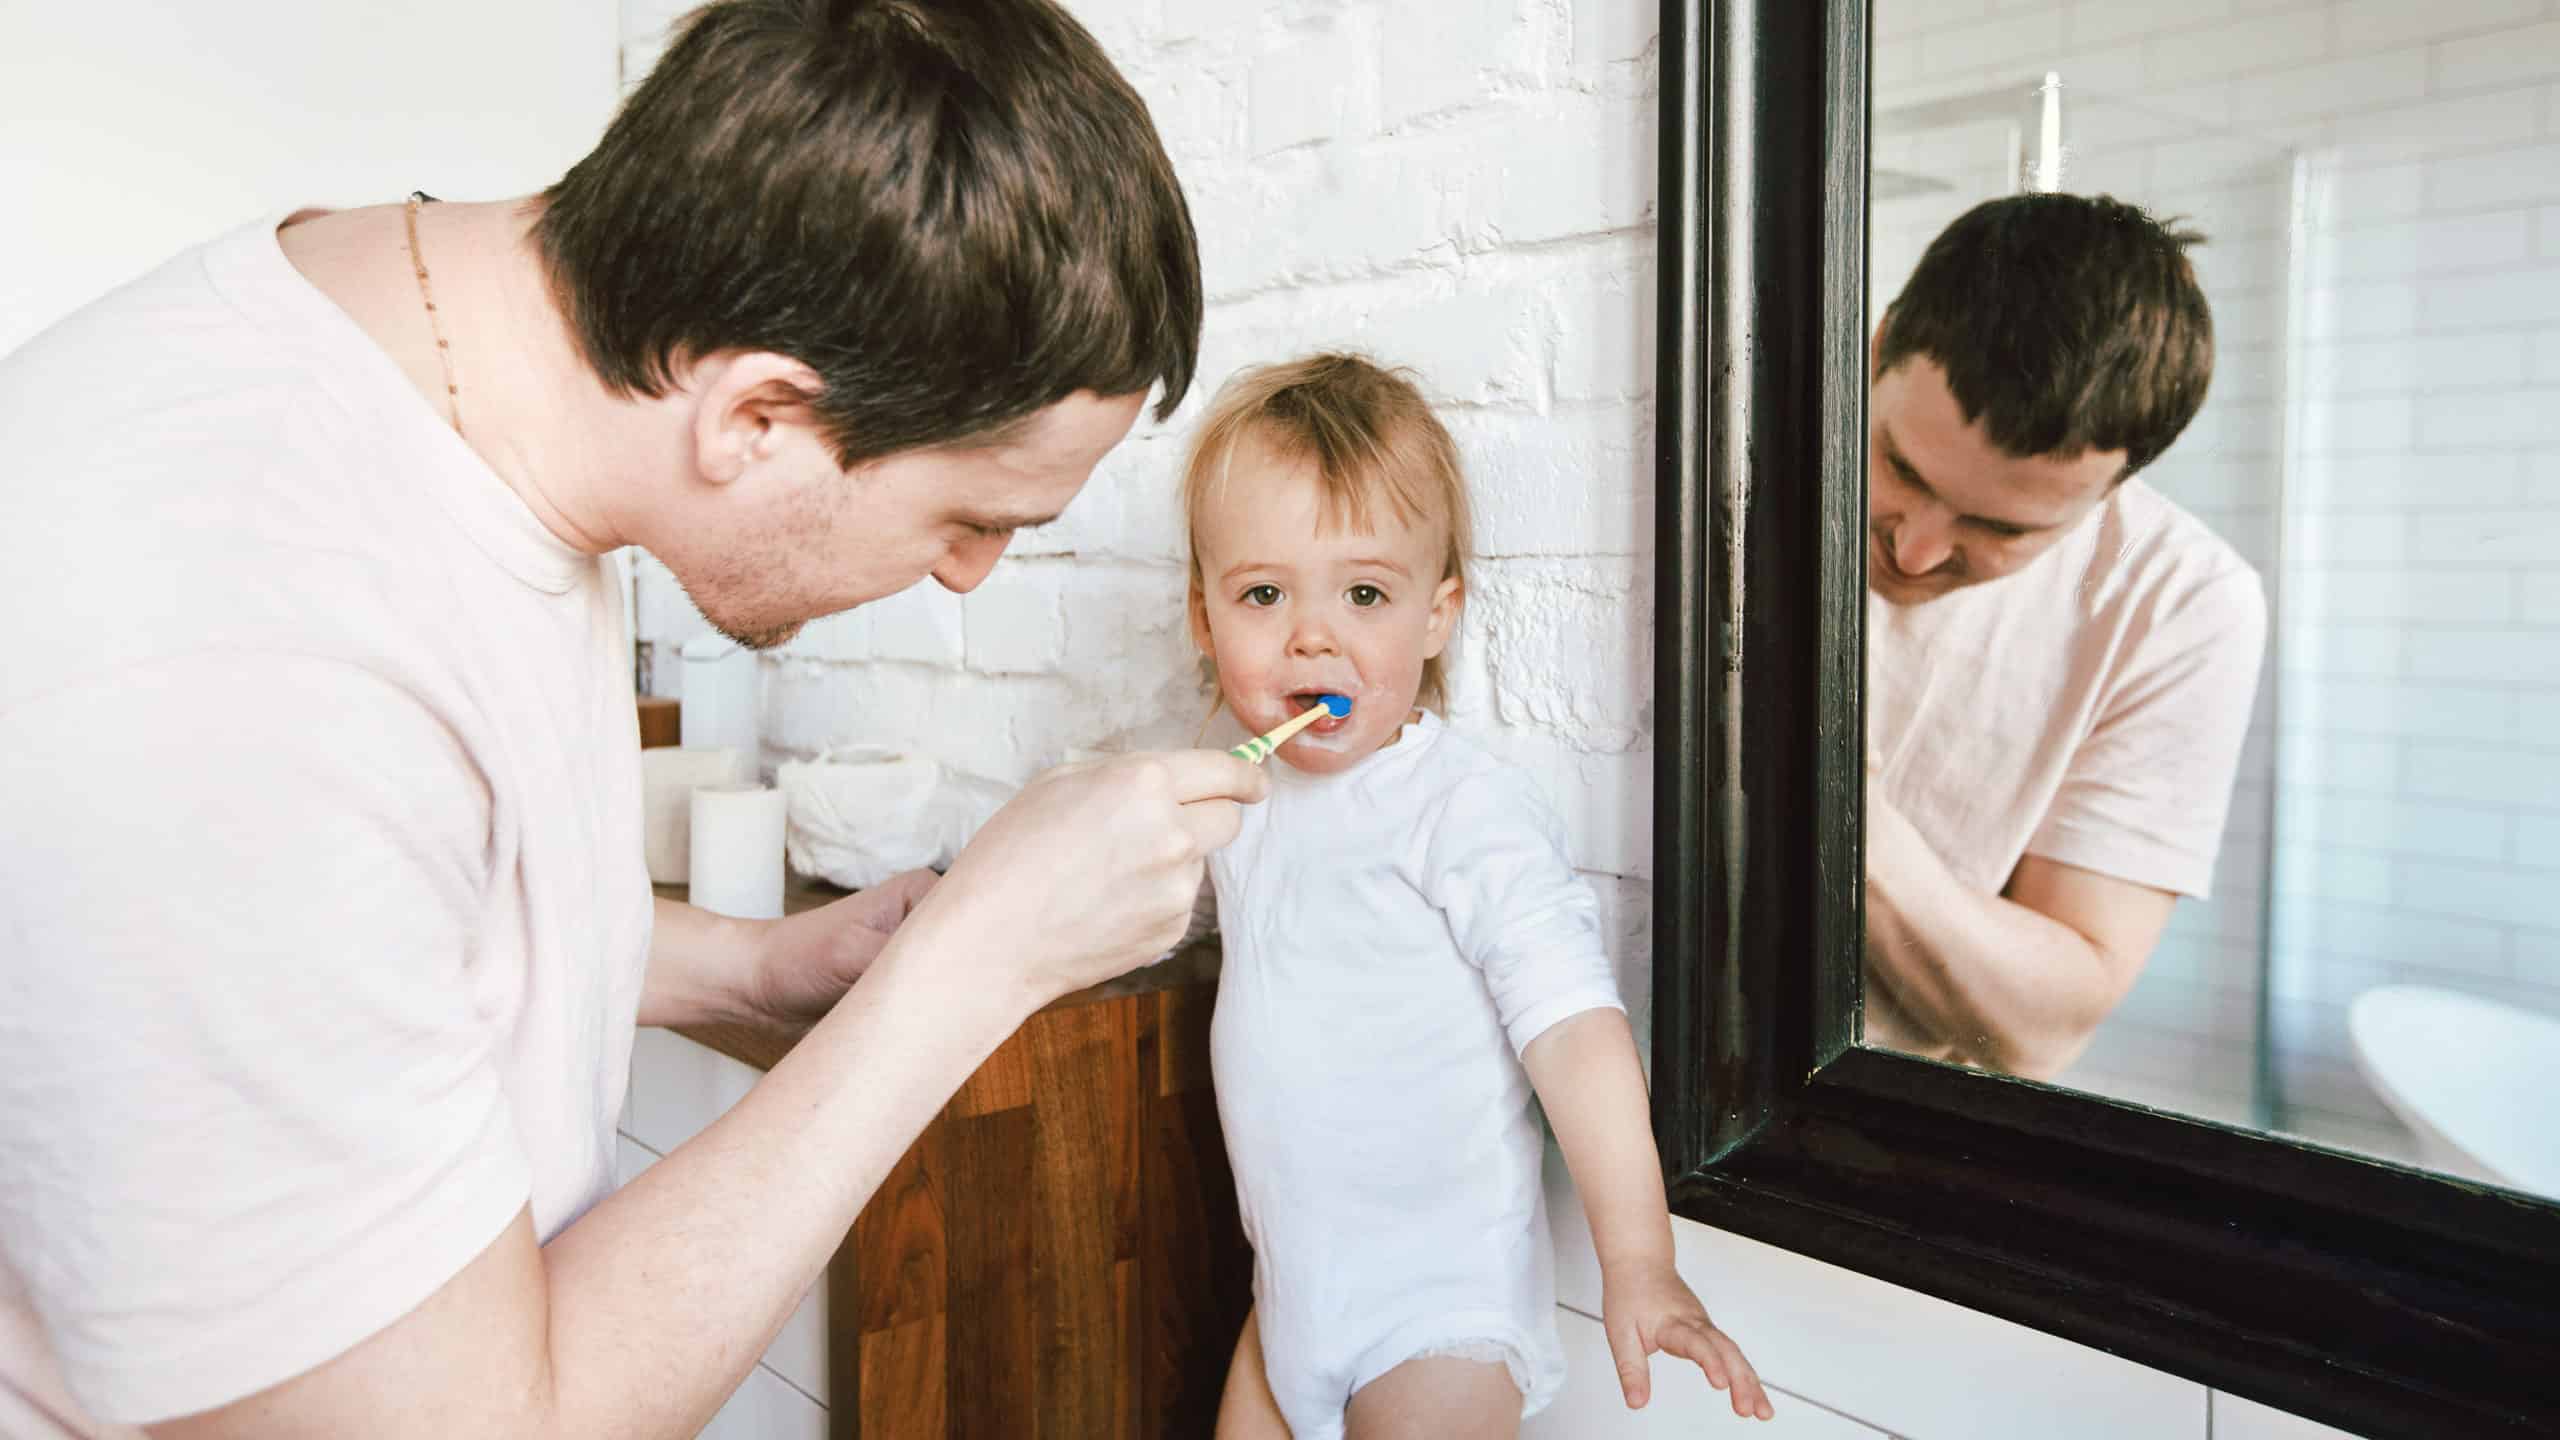 Husband brushing toddler's teeth showing how to love your wife